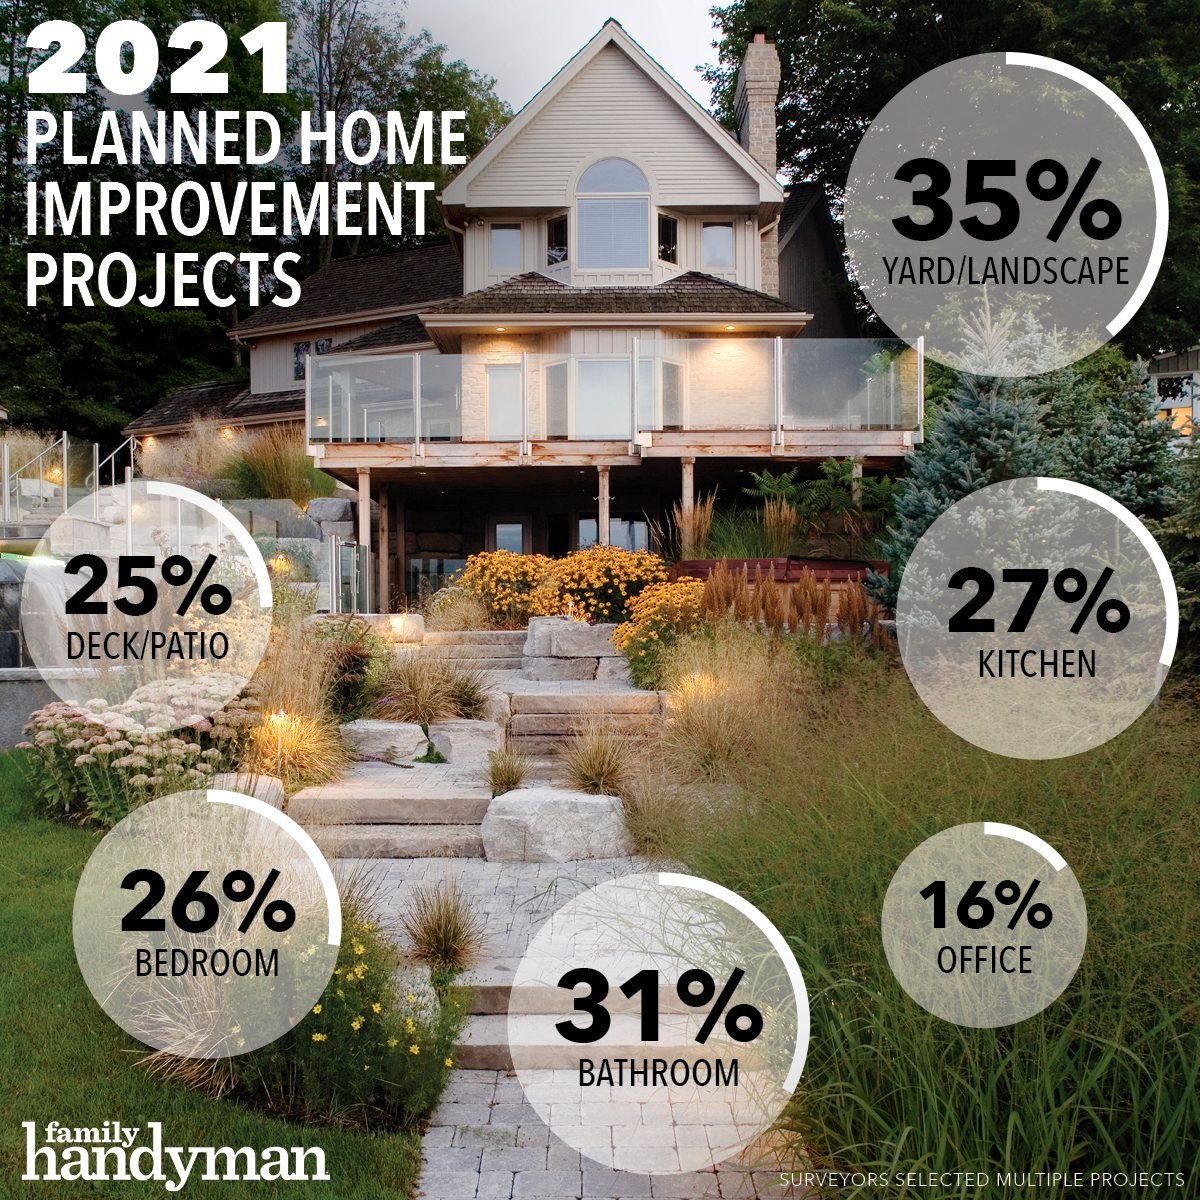 Which Home Improvement Projects Are Most Popular in 2021?